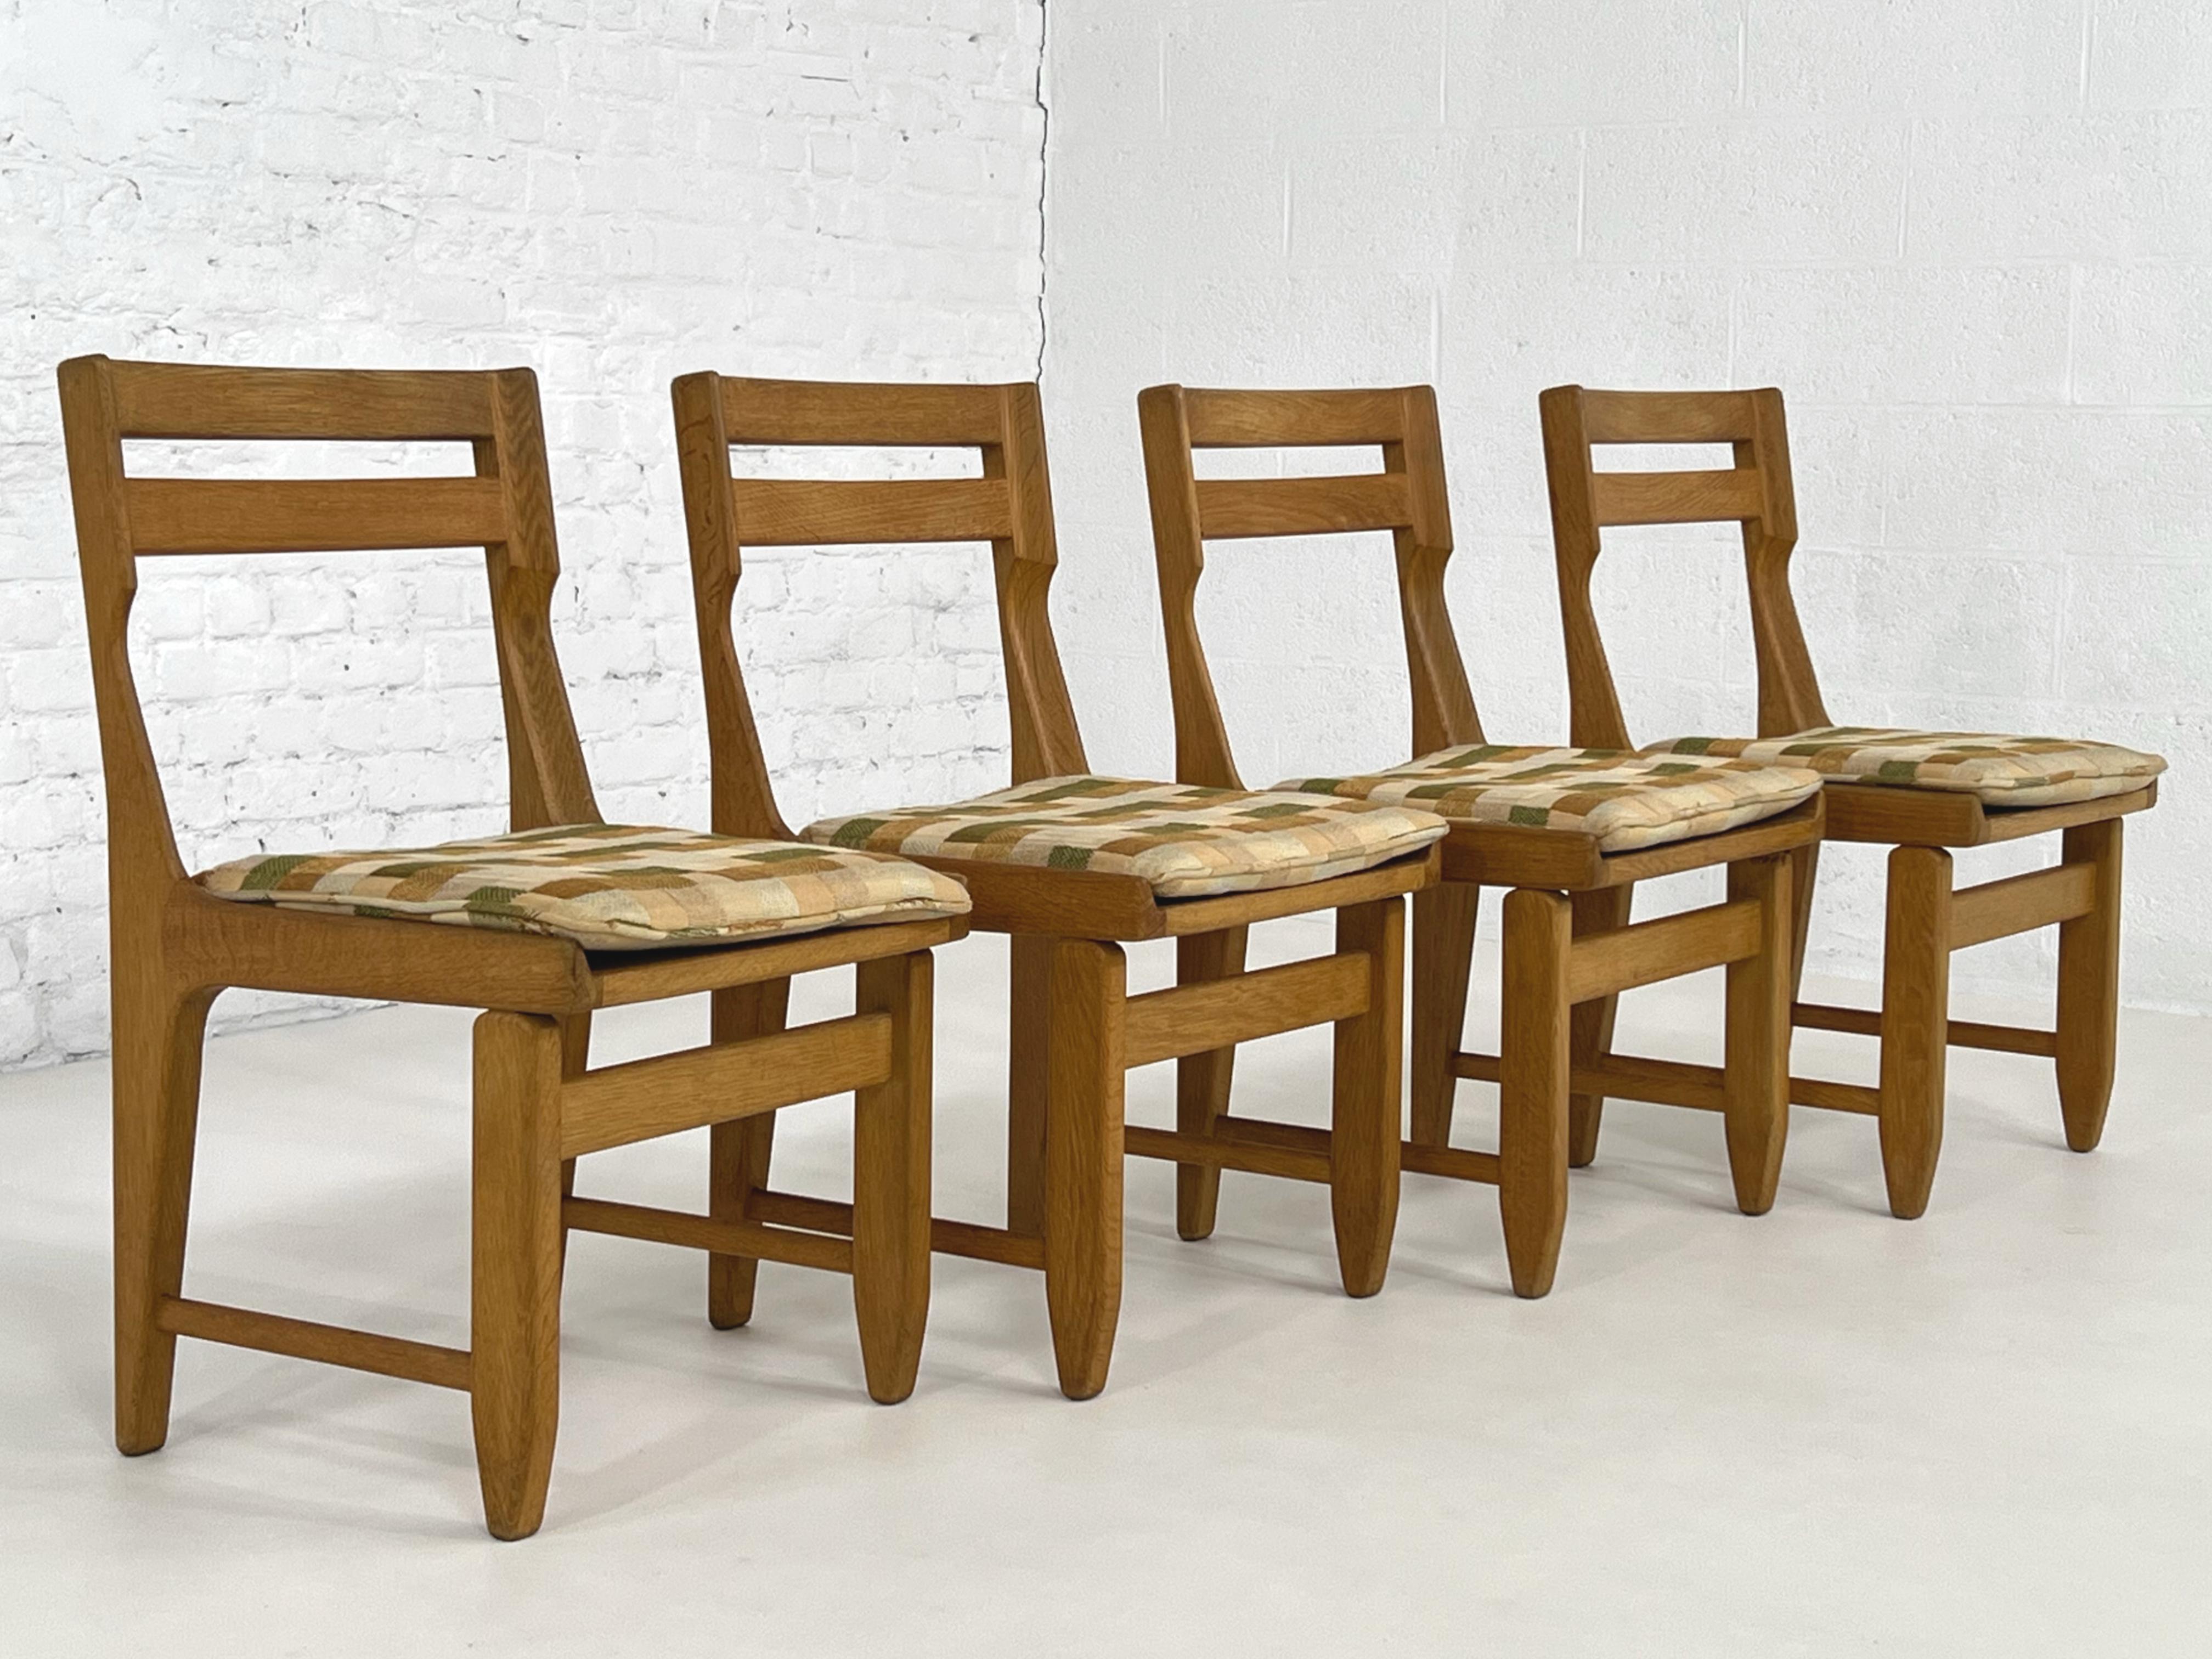 1960s French Guillerme And Chambron Duo Design Oak Wooden and Fabric Set of Four Dining Chairs ' Raphael ' Model.